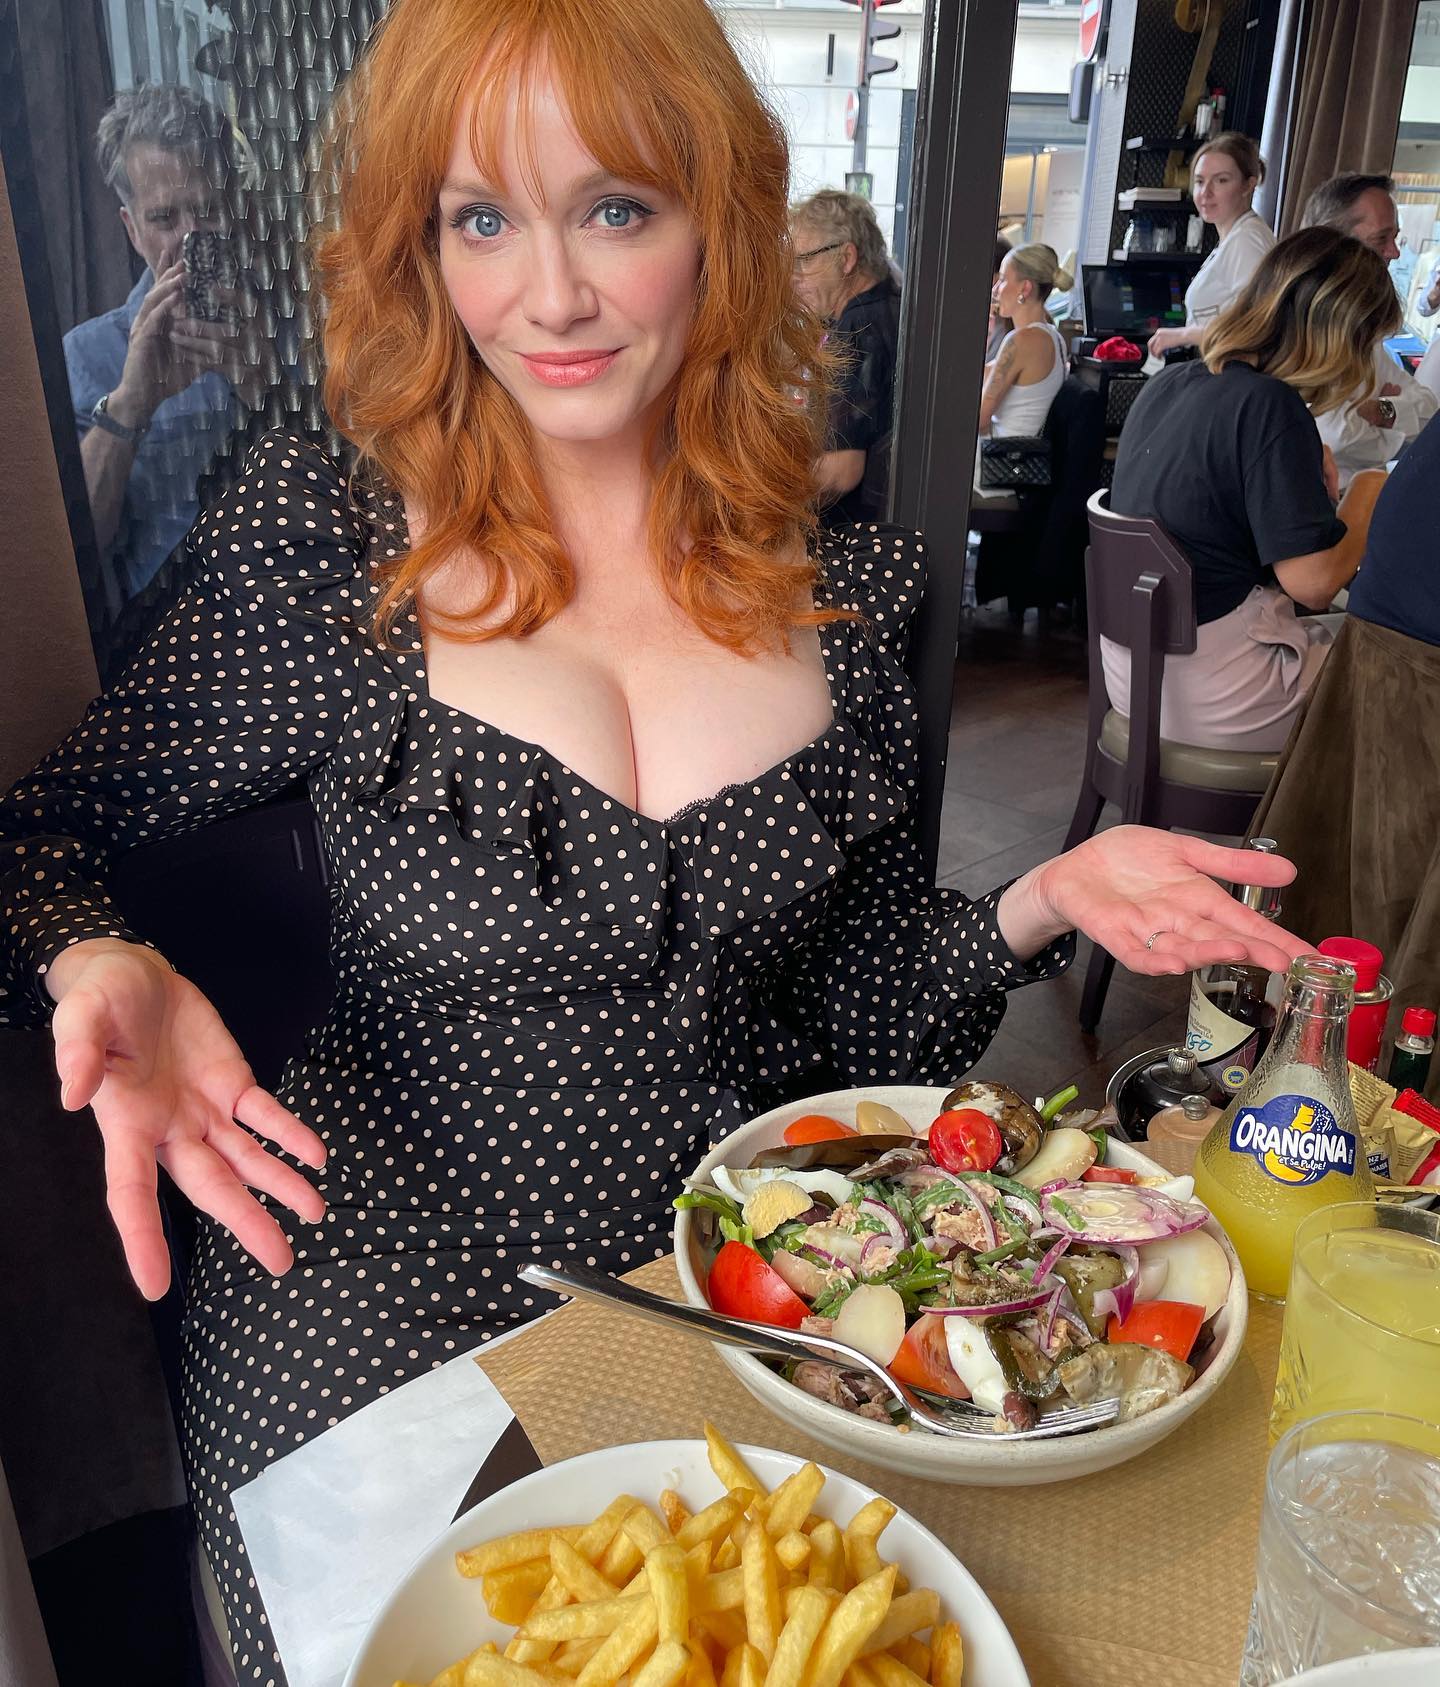 Christina risked a wardrobe malfunction as she took to her Instagram to share a glimpse of her meal while in Paris, France